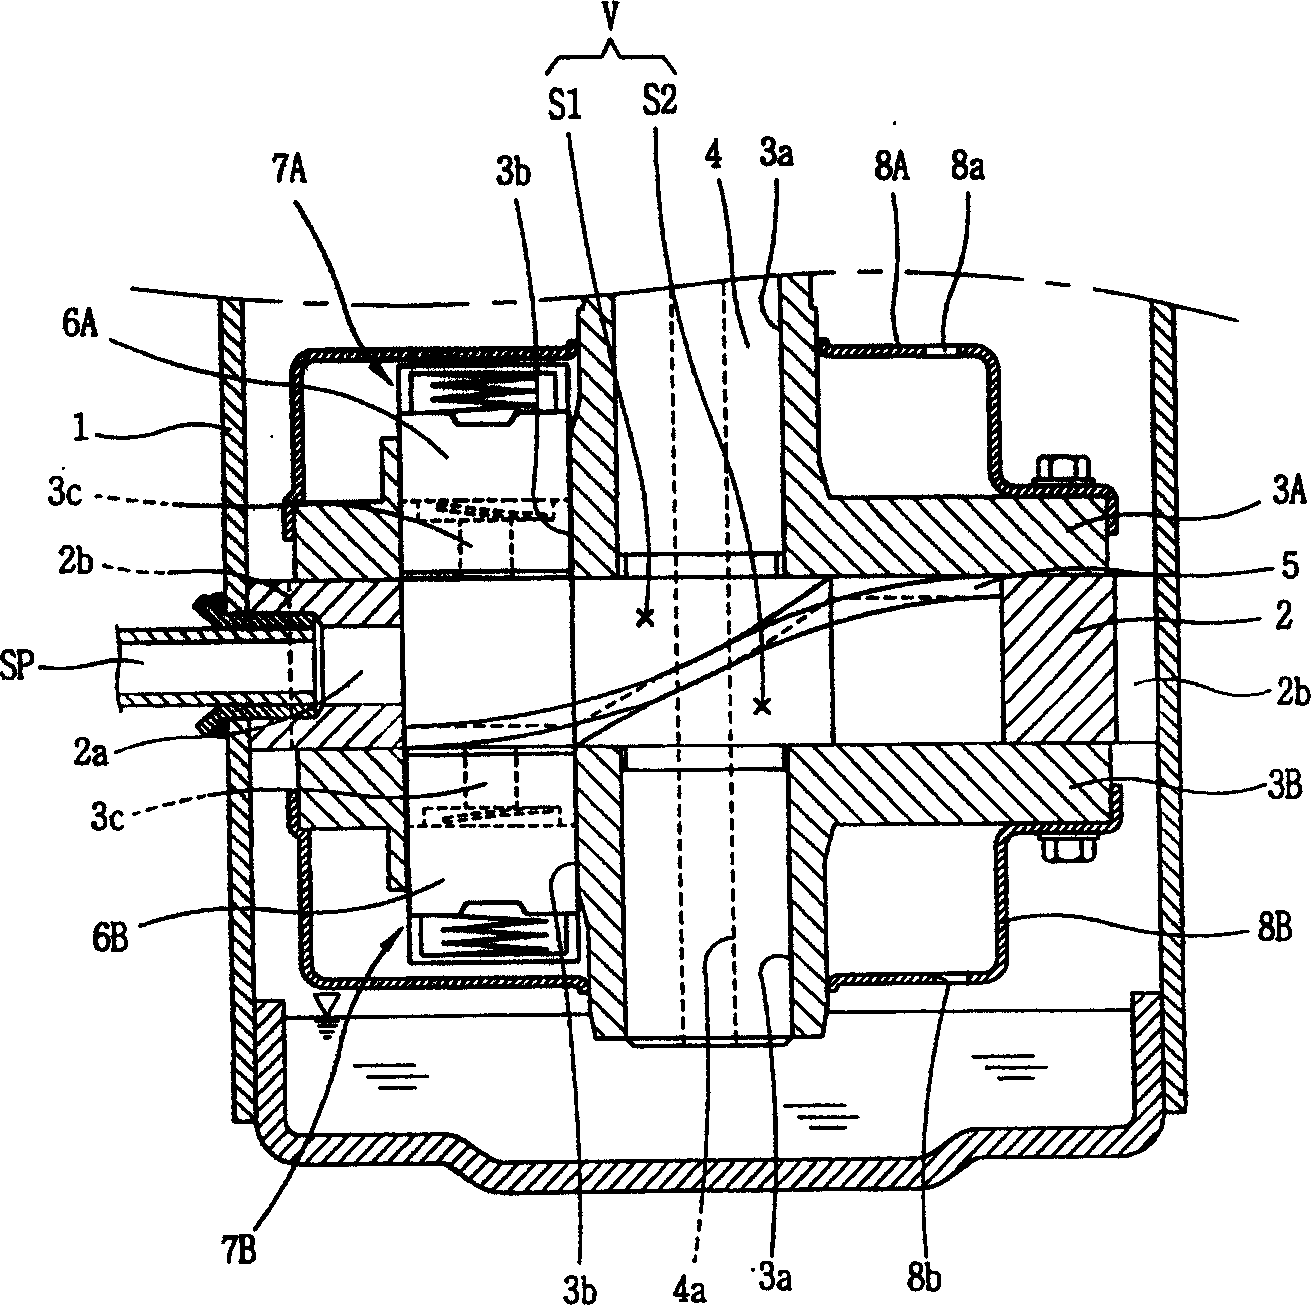 Exhaust gas quide structure of closed compressor